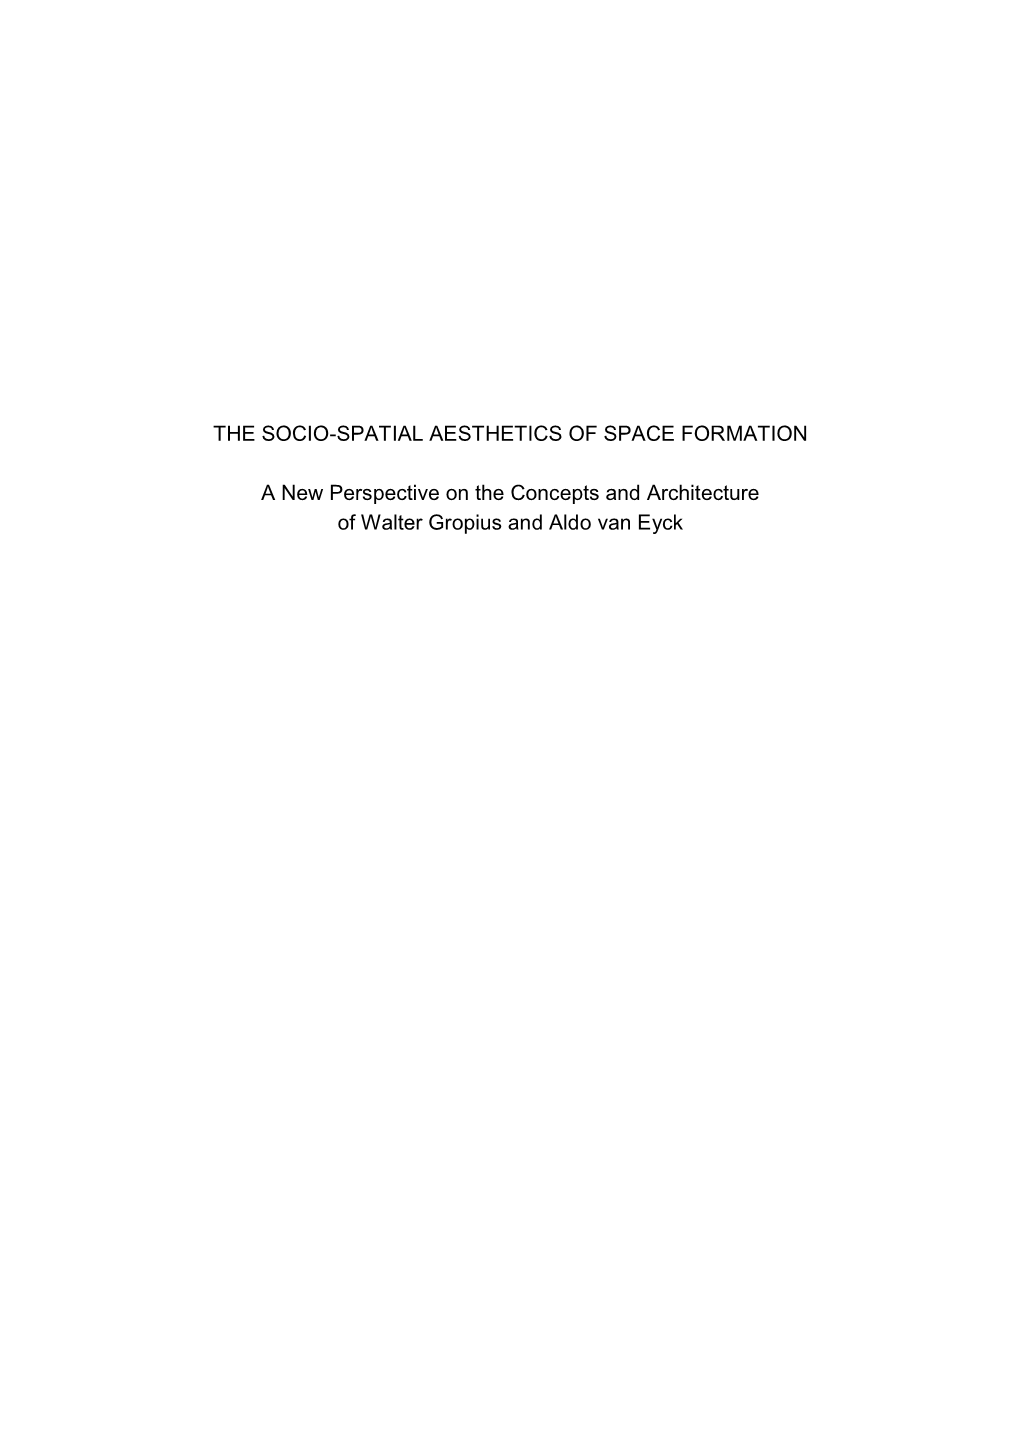 THE SOCIO-SPATIAL AESTHETICS of SPACE FORMATION a New